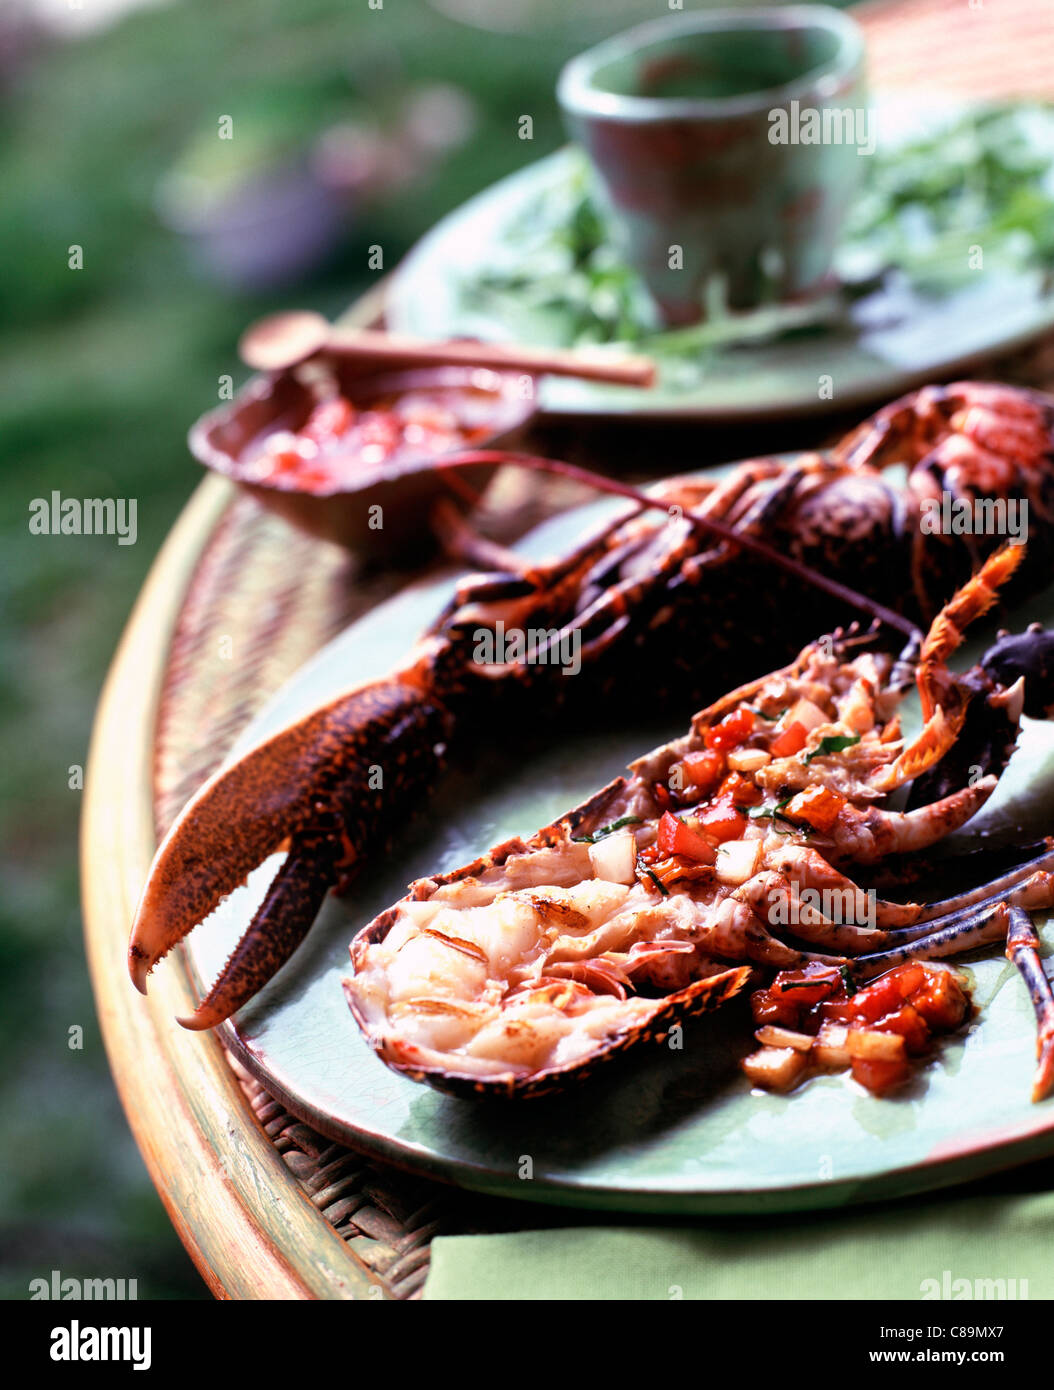 Lobster with dried tomato sauce Stock Photo